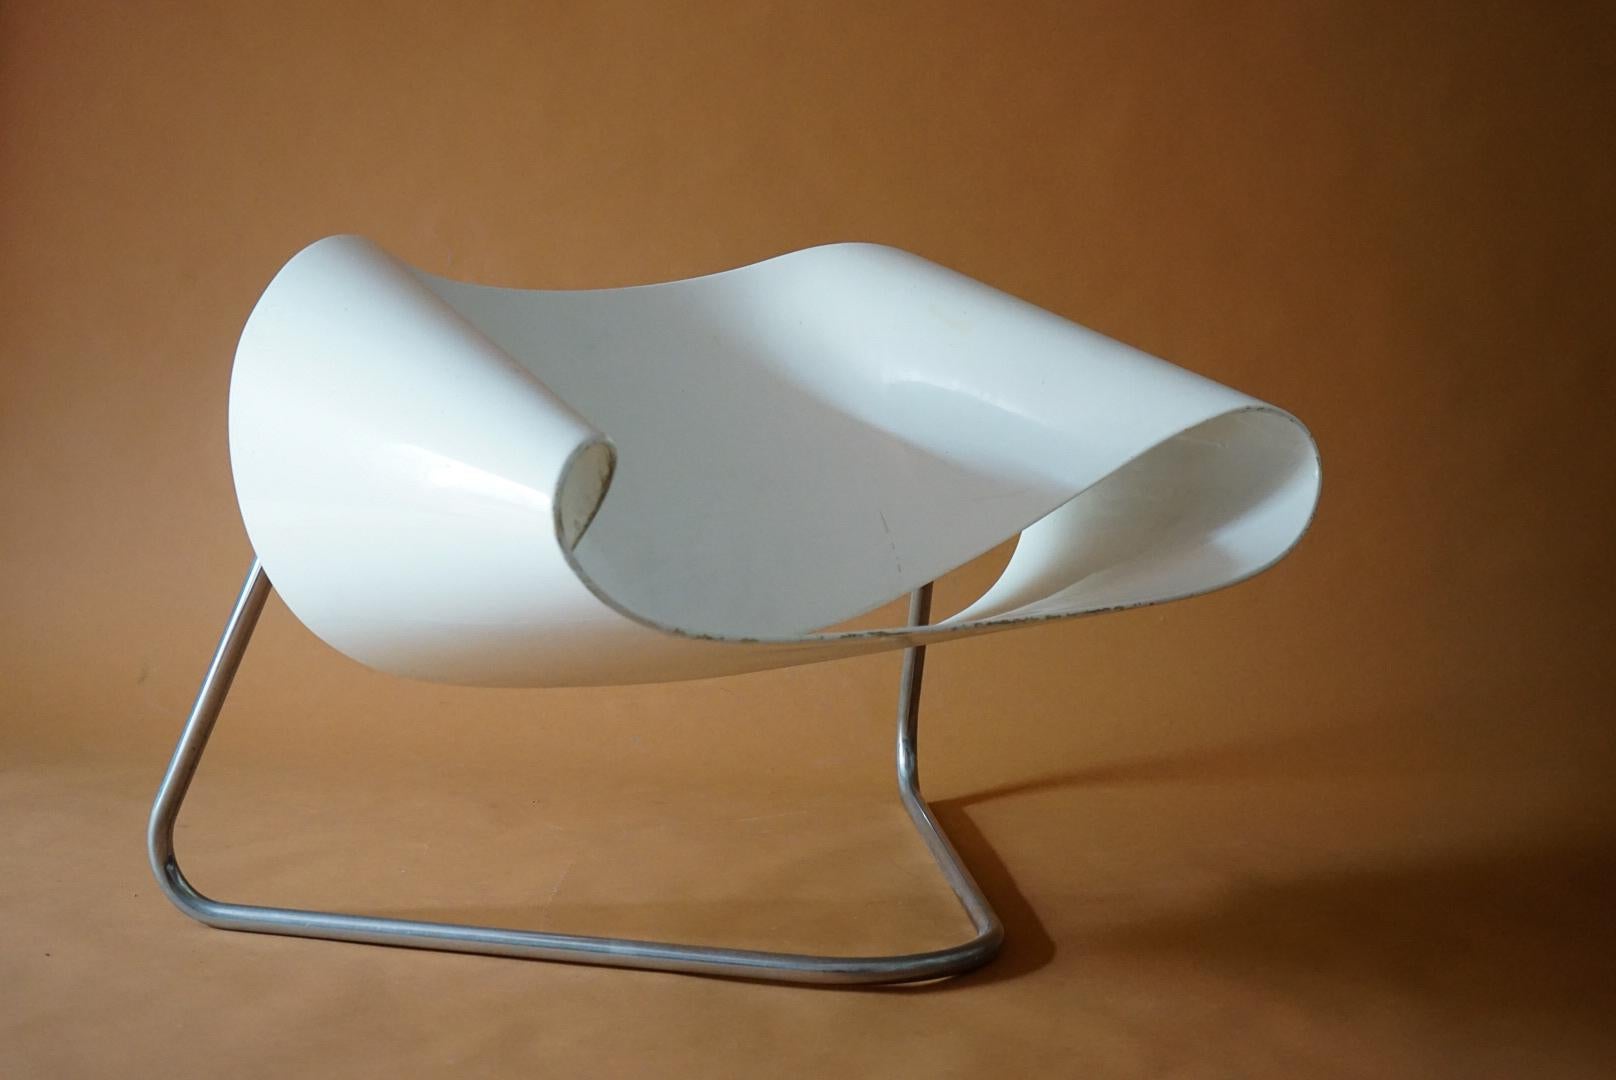 Cesare Leonardi and Franca Stagi model CL9 Ribbon chair for Bernini, Italy, circa 1961 is made up of moulded fiberglass seating section on a polished steel tubular base. The seat section of this design is attached to the tubular steel base by means